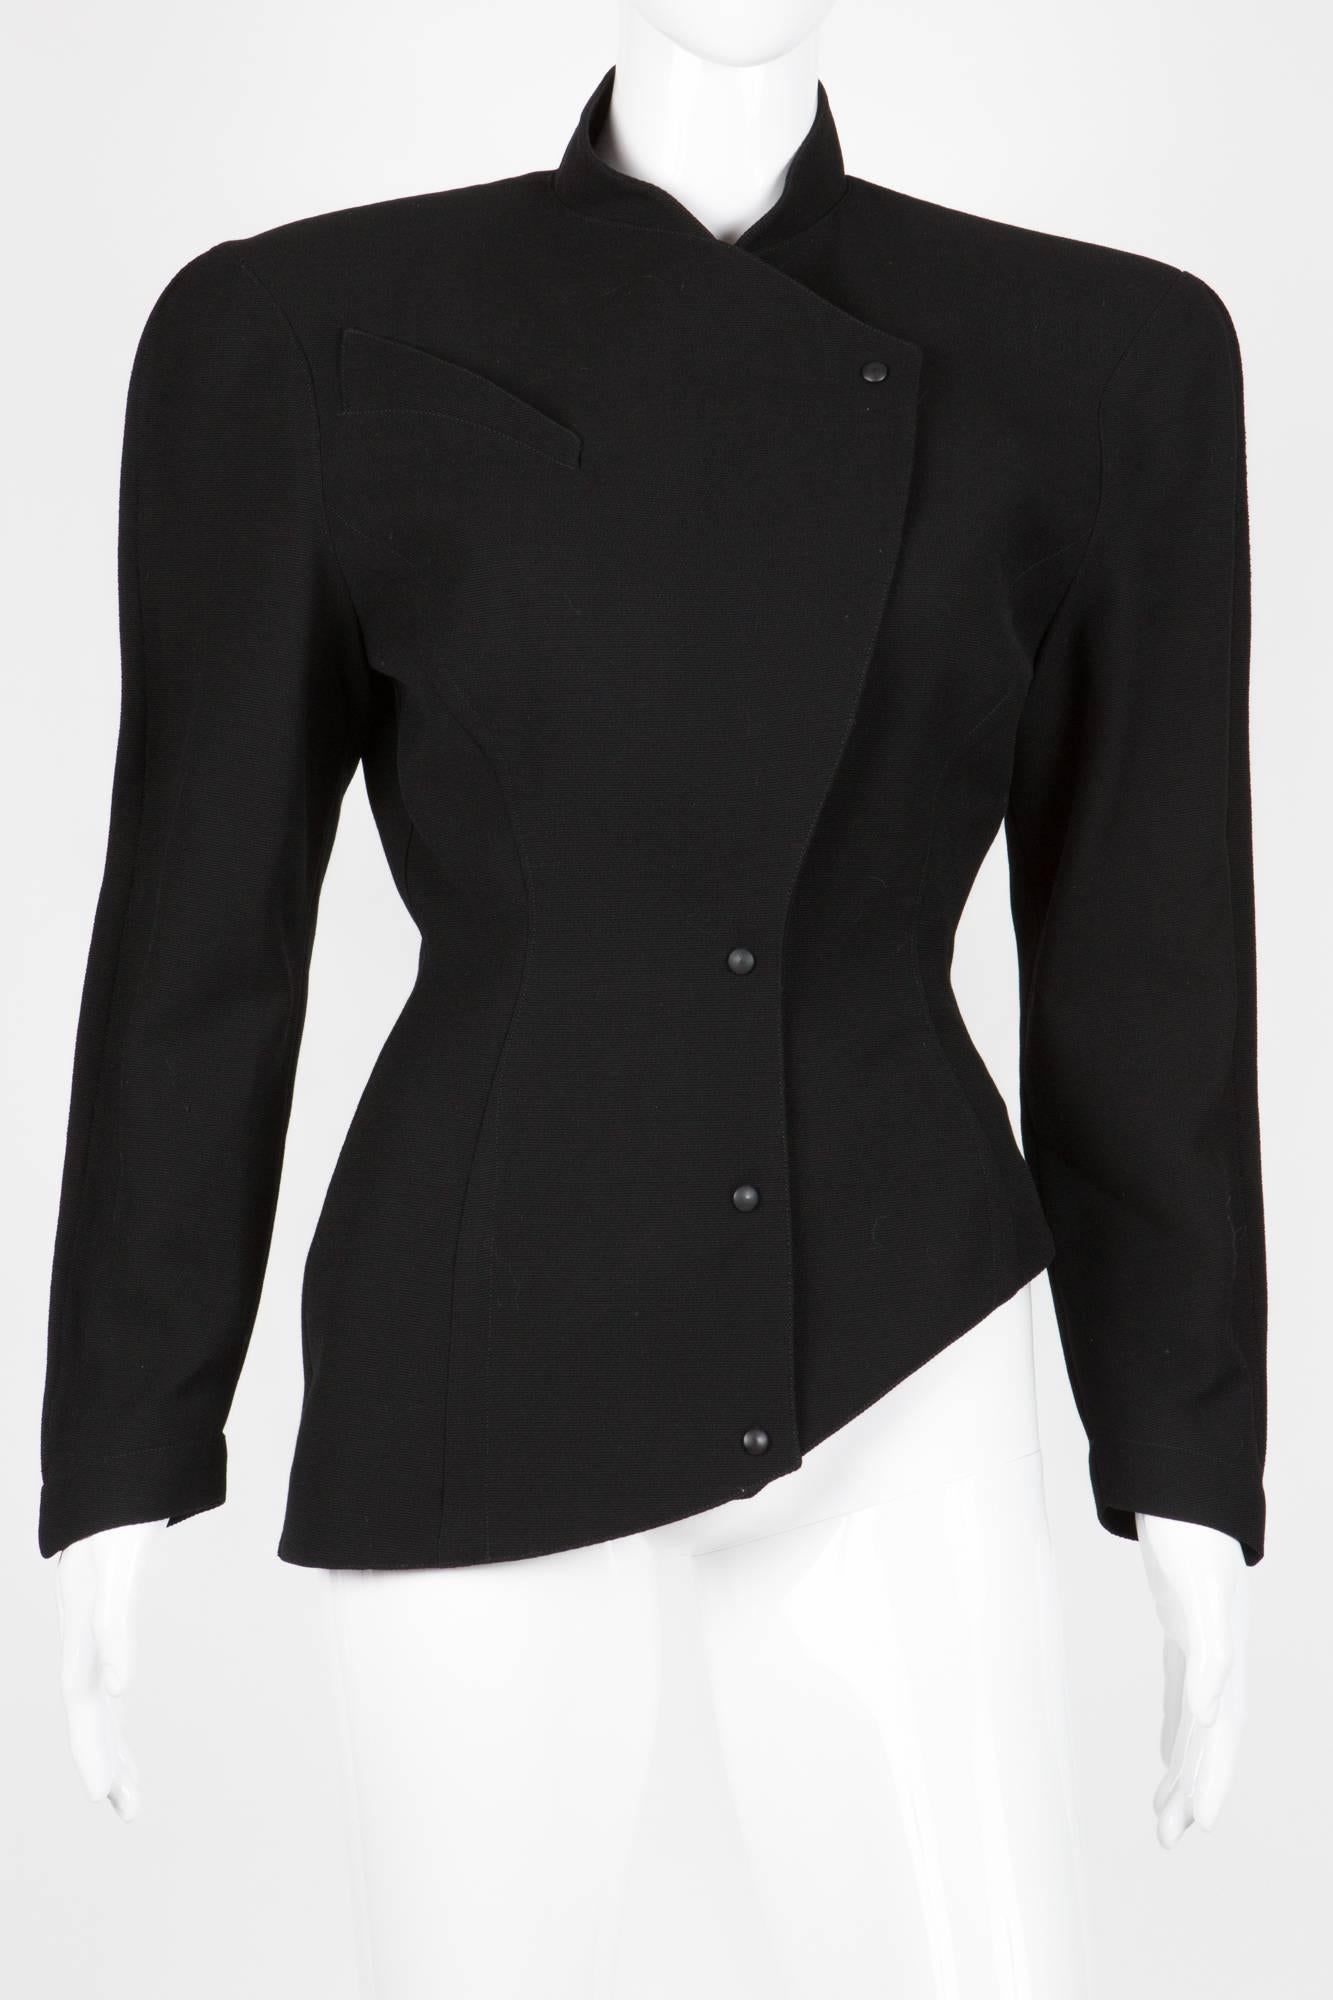 1980s Thierry Mugler black asymmetric crepe wool jacket featuring a center front button opening, Emblematic Mugler volume, this jacket gets large shoulder pads and fitted waistline. This fitted jacket is fully lined. 
In excellent vintage